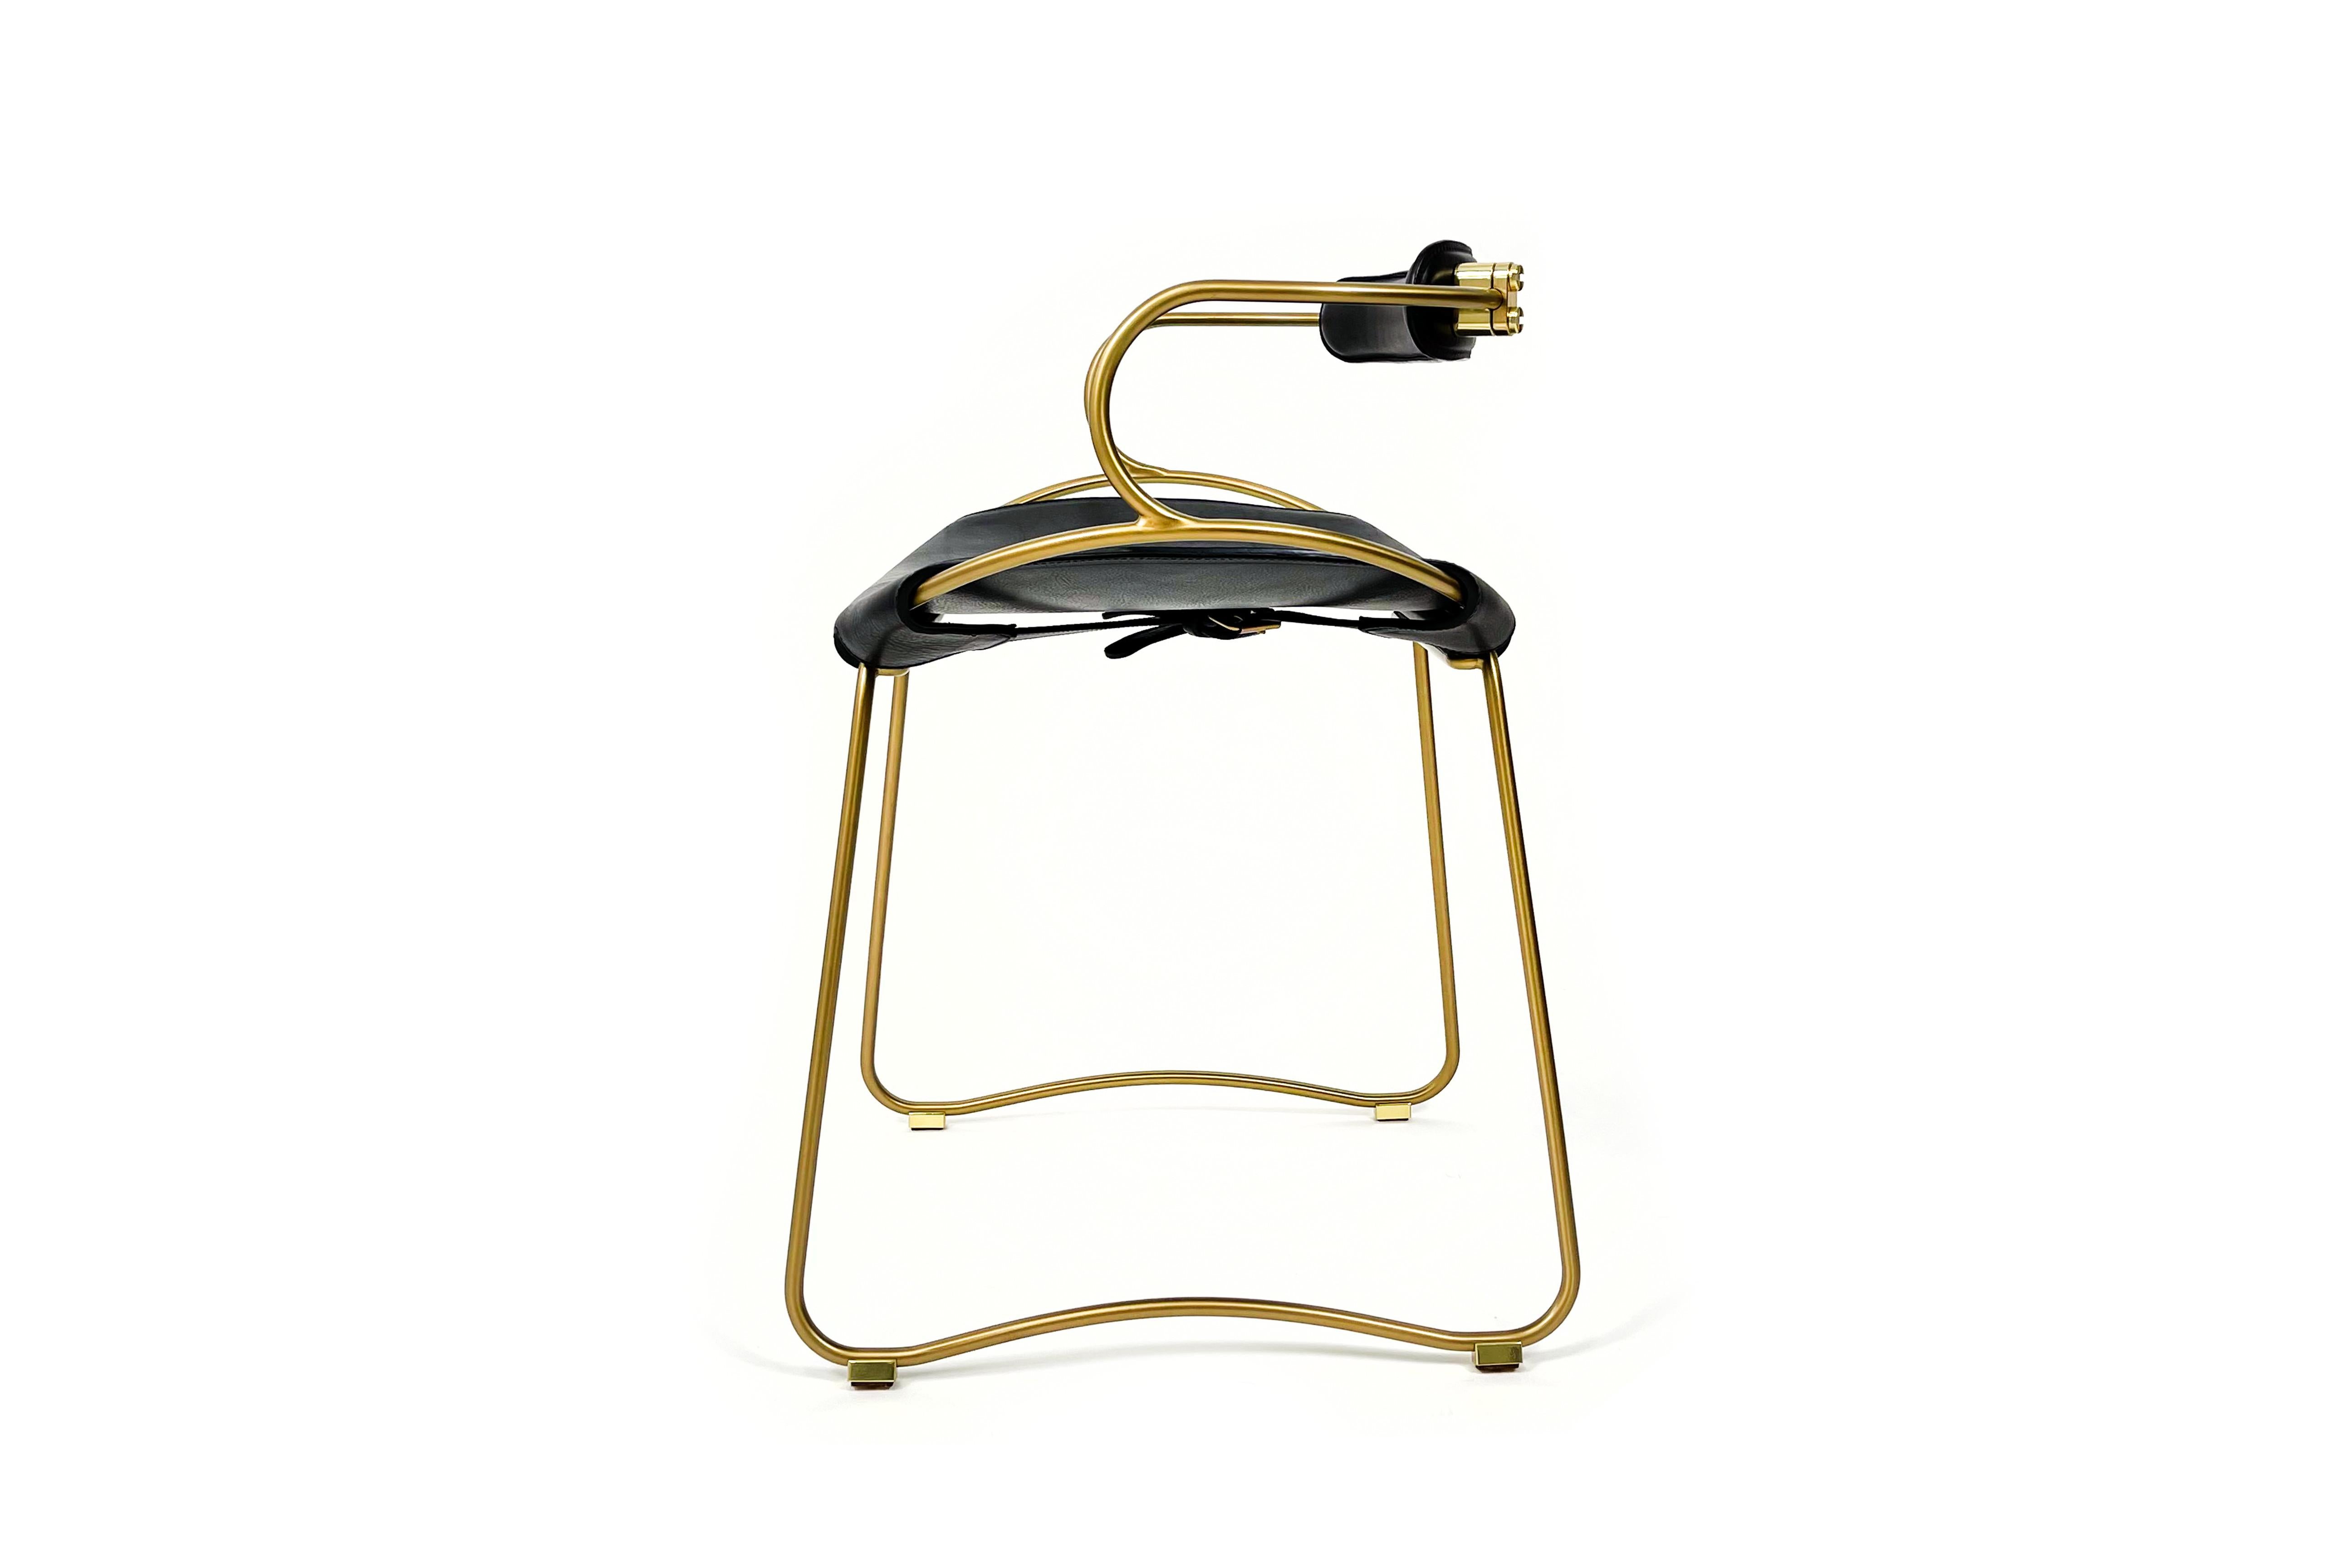 Polished Contemporary Table Bar Stool w Backrest Aged Brass Metal & Black Leather Organic For Sale